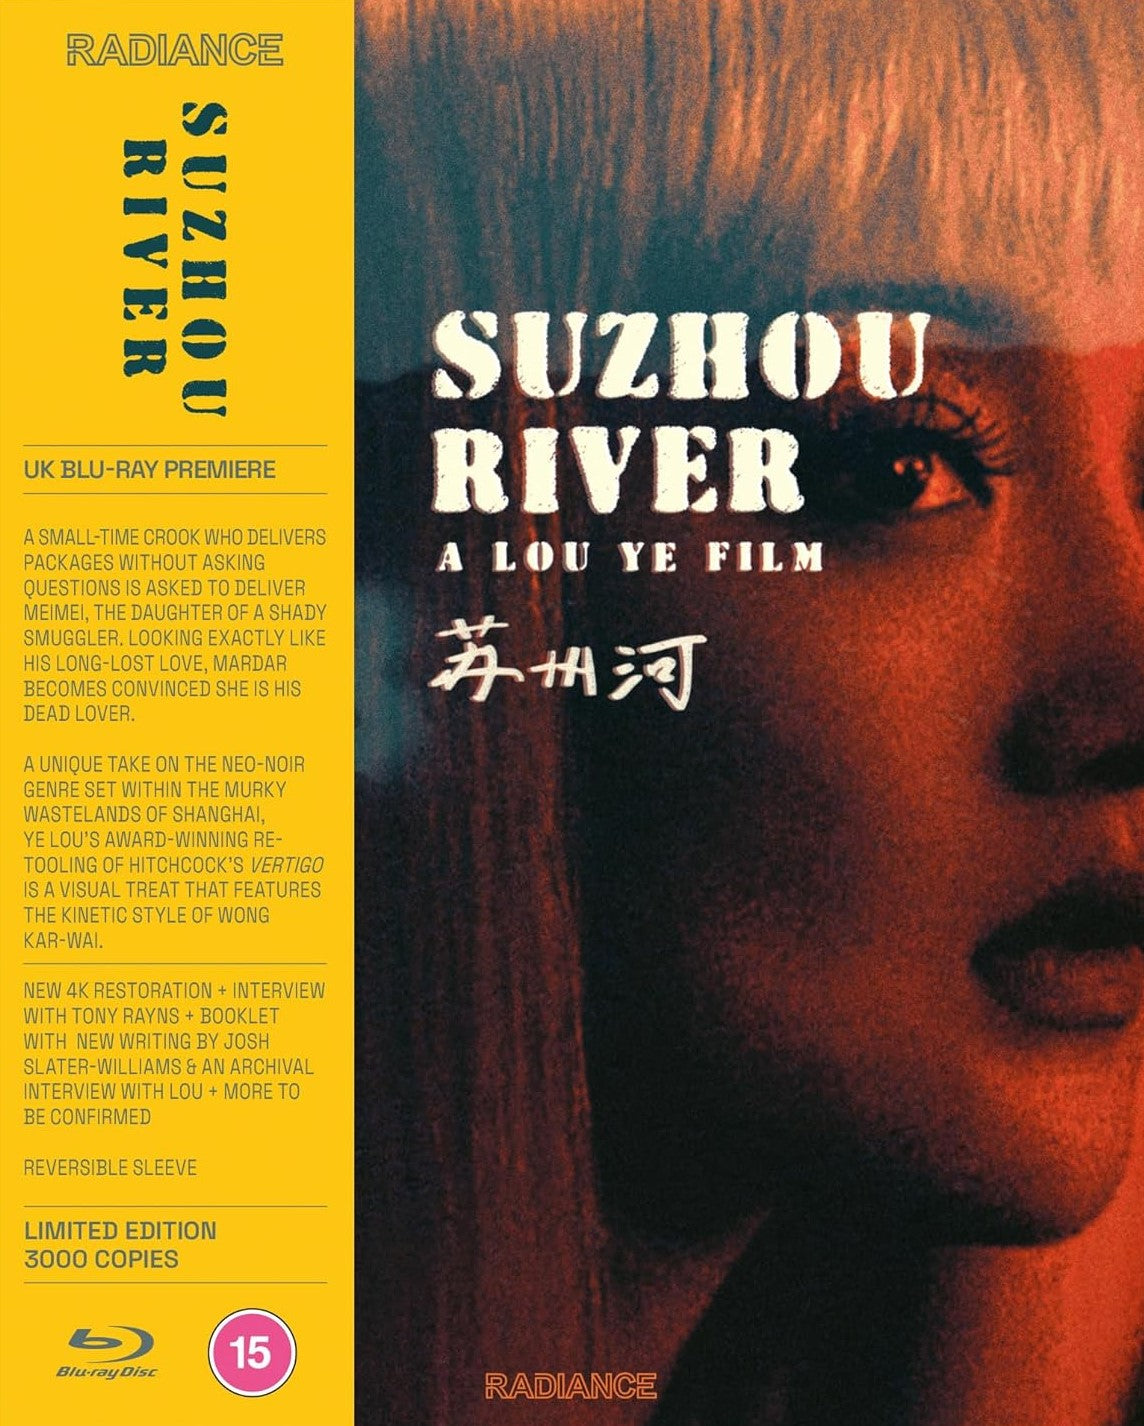 Suzhou River Limited Edition Radiance Films Blu-Ray [PRE-ORDER]